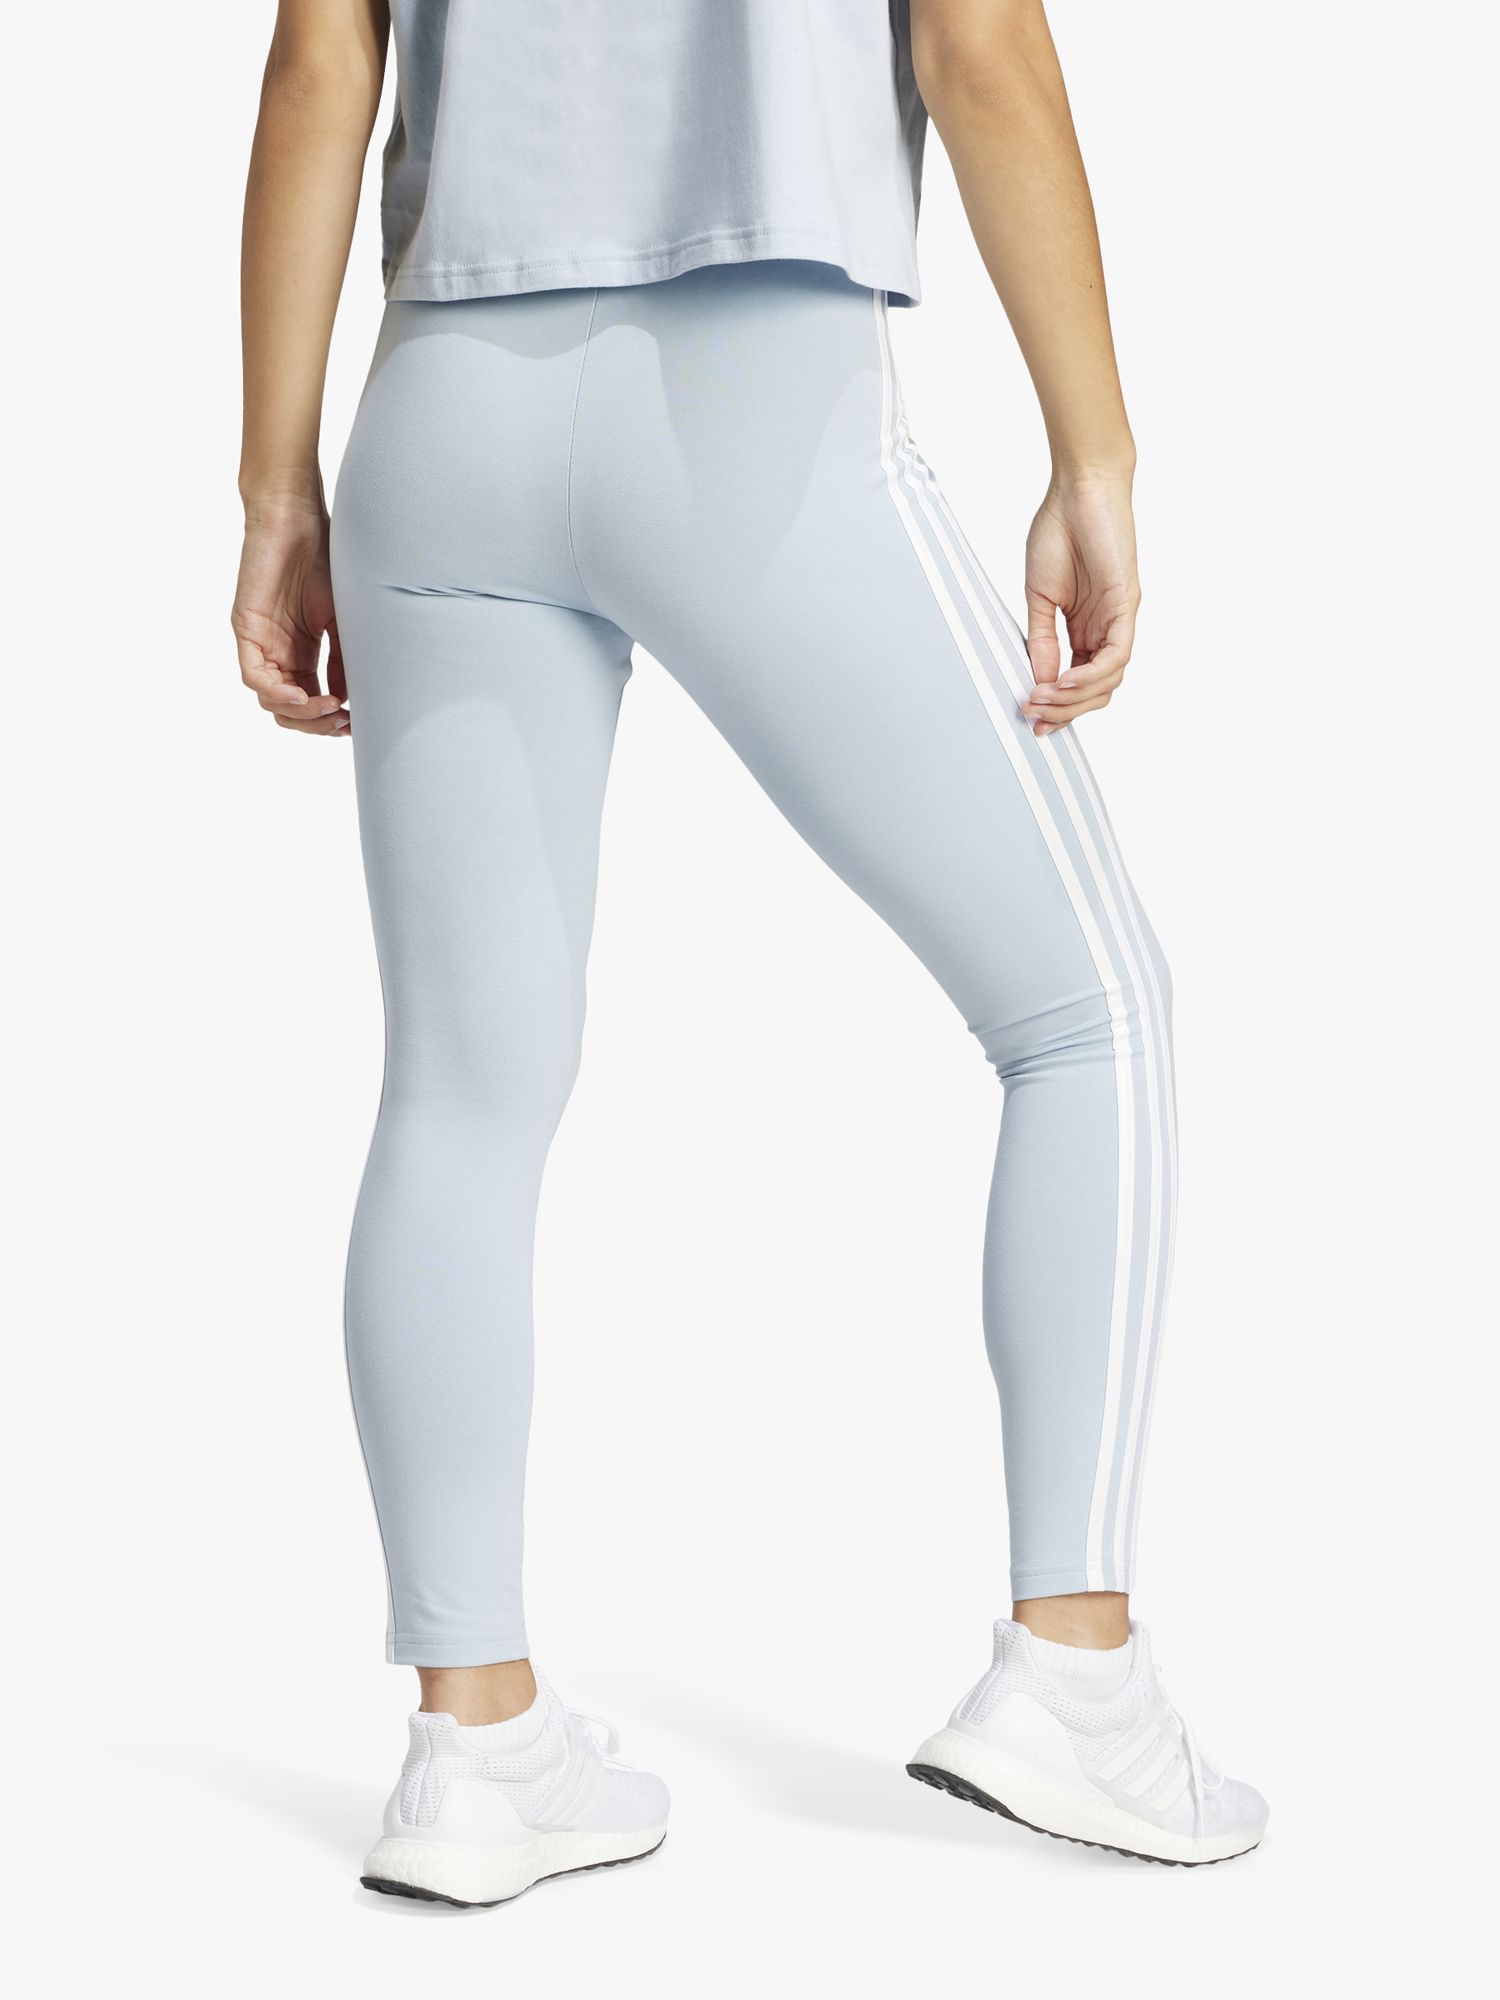 adidas Essentials 3 Stripes High Wasisted Jersey Leggings, Blue, L